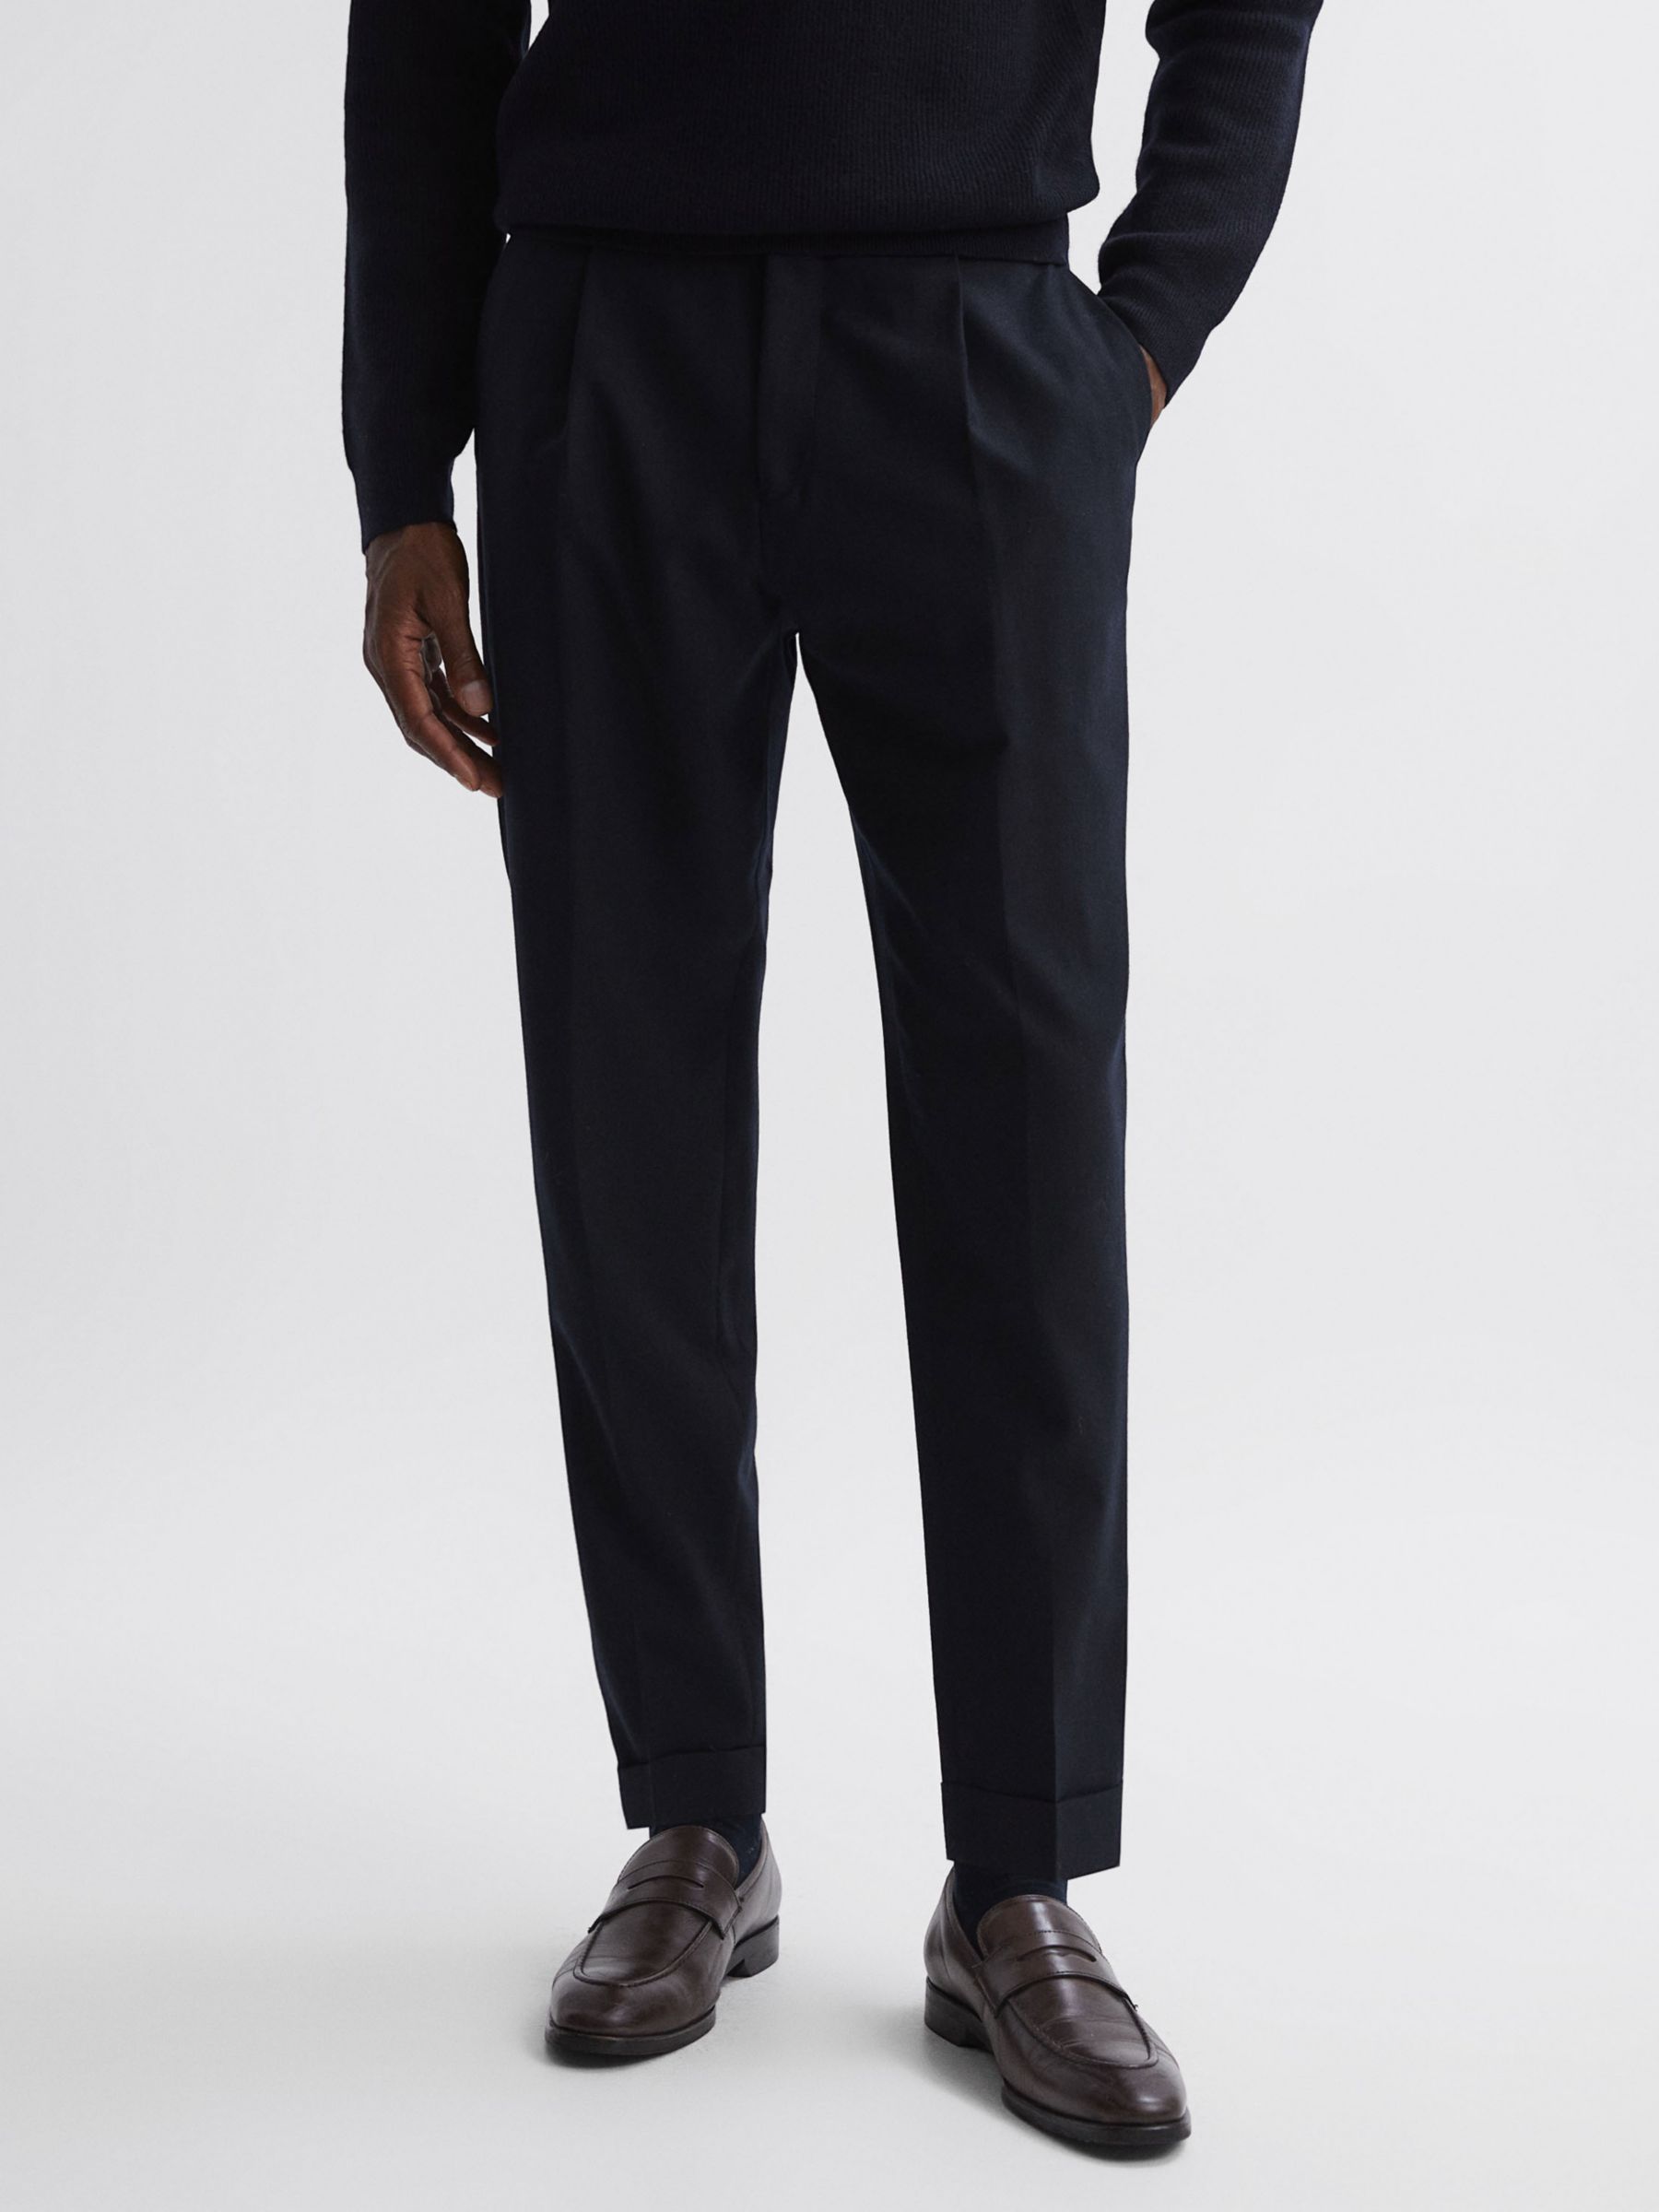 Reiss Beadnell Brushed Wool Trousers, Navy at John Lewis & Partners